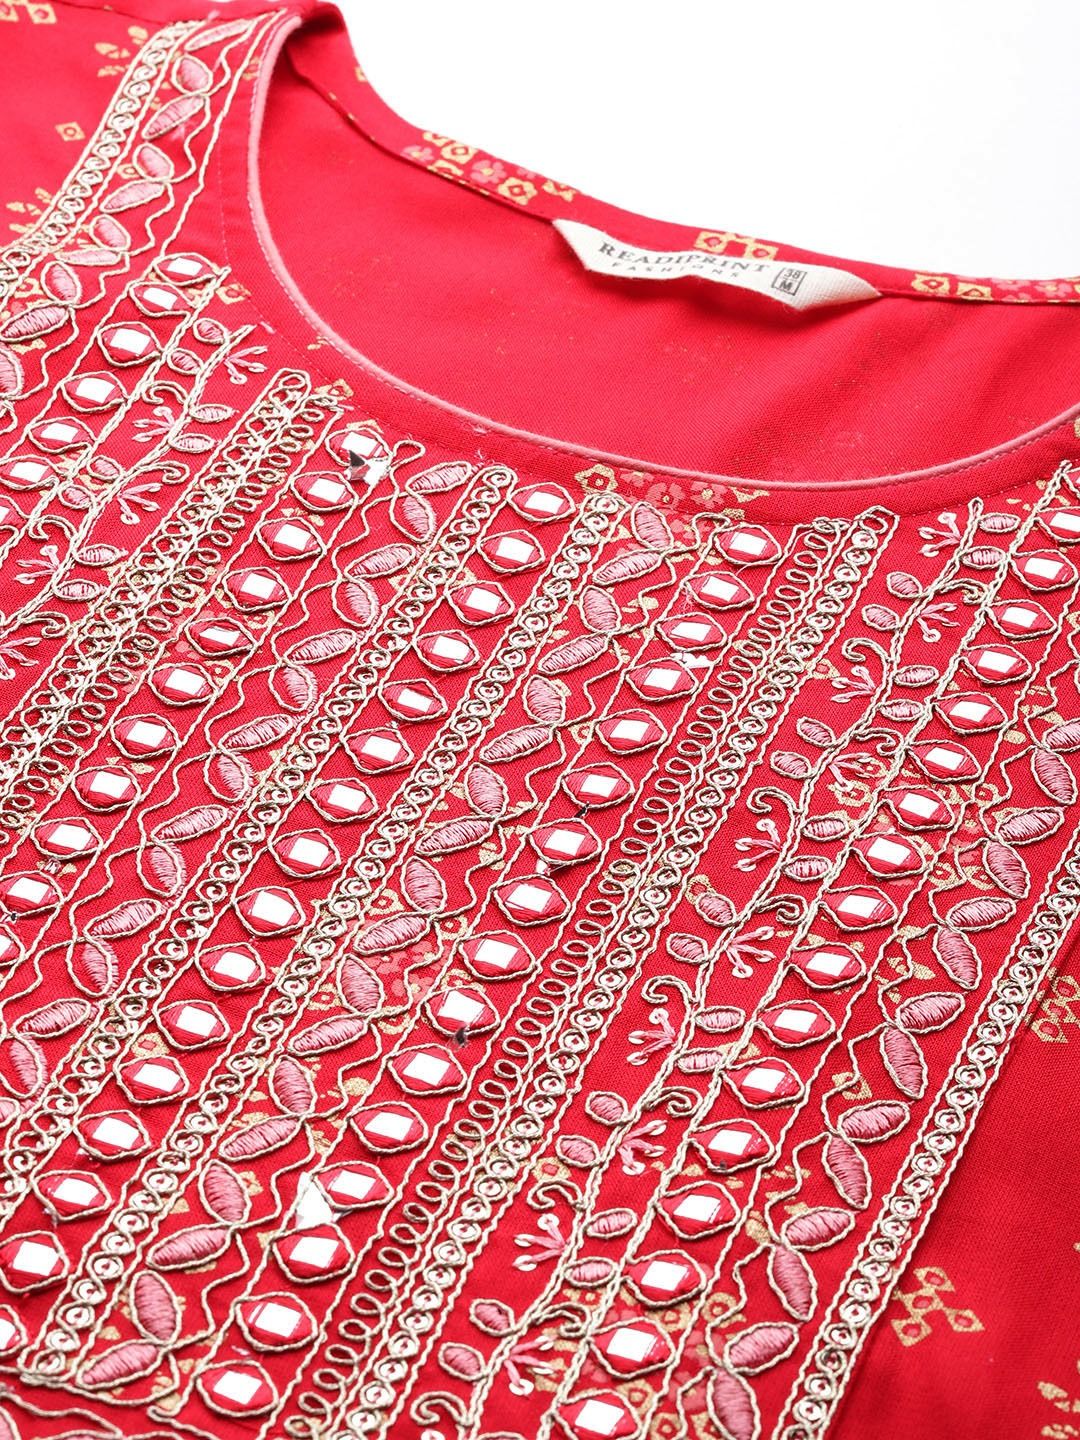 Straight  Style Rayon Fabric Red Color Kurta With Bottom